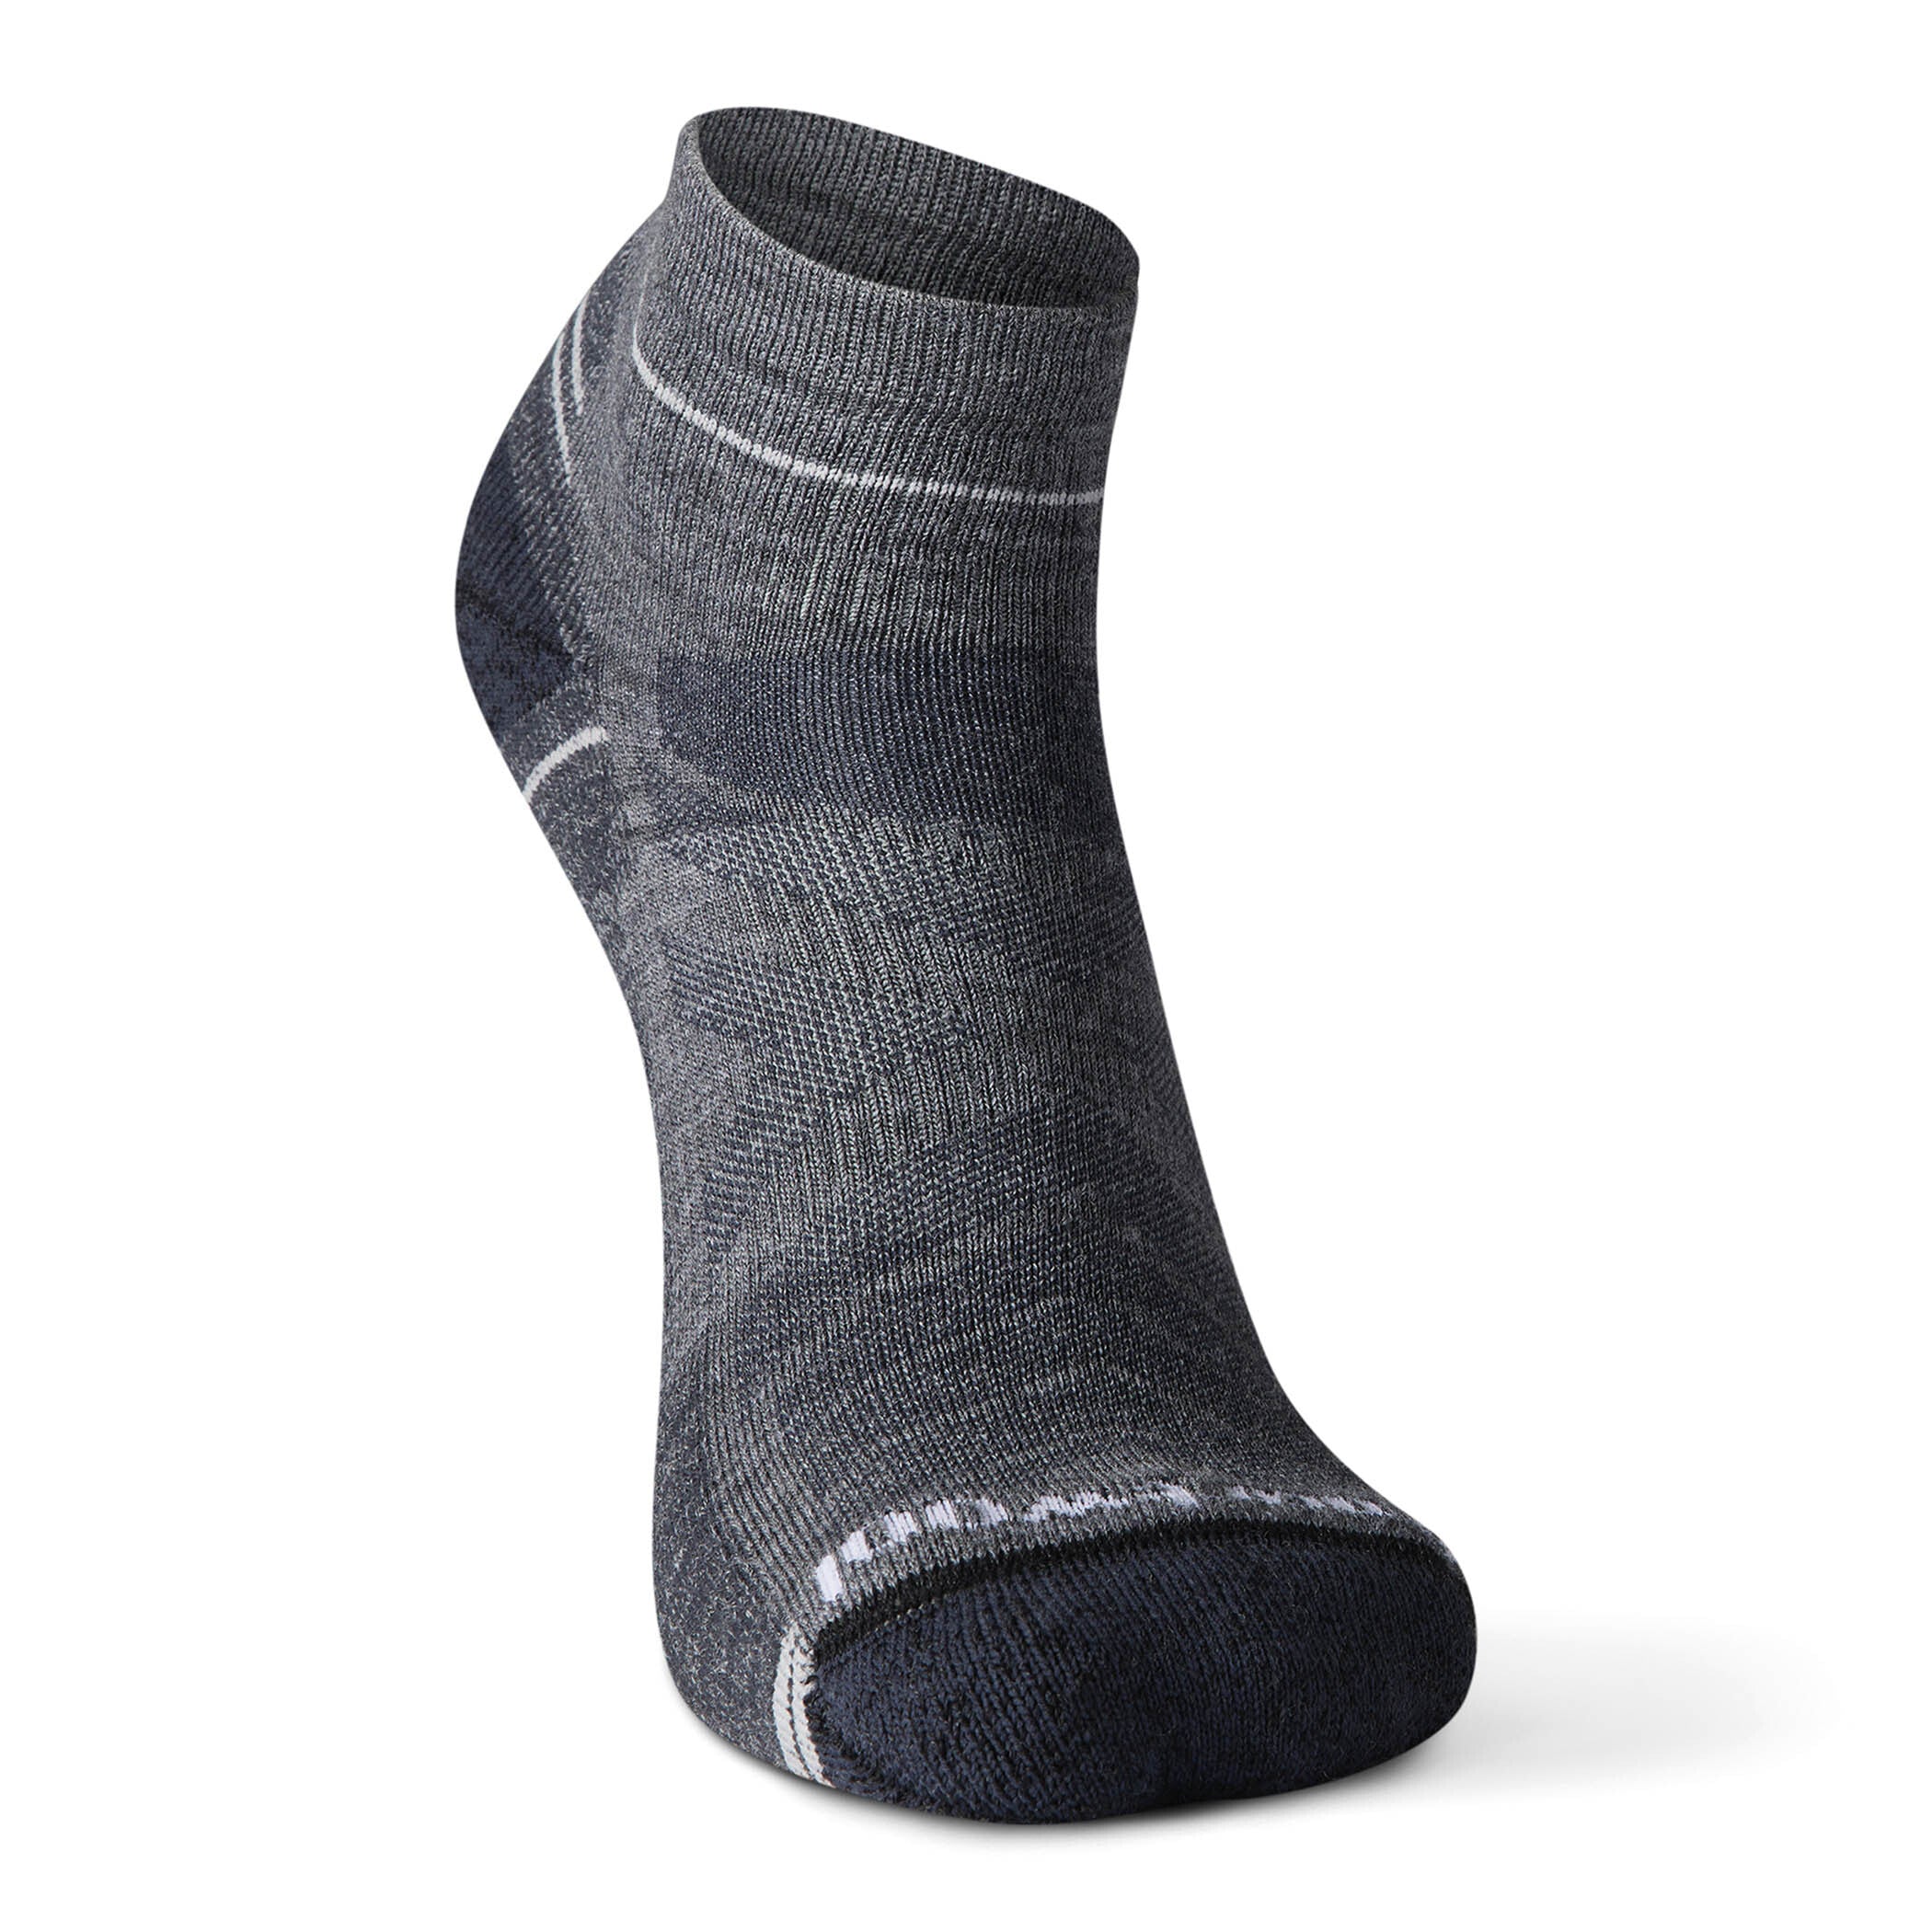 Smartwool Hike Light Cushion Ankle Sock | SMARTWOOL | Portwest - The Outdoor Shop